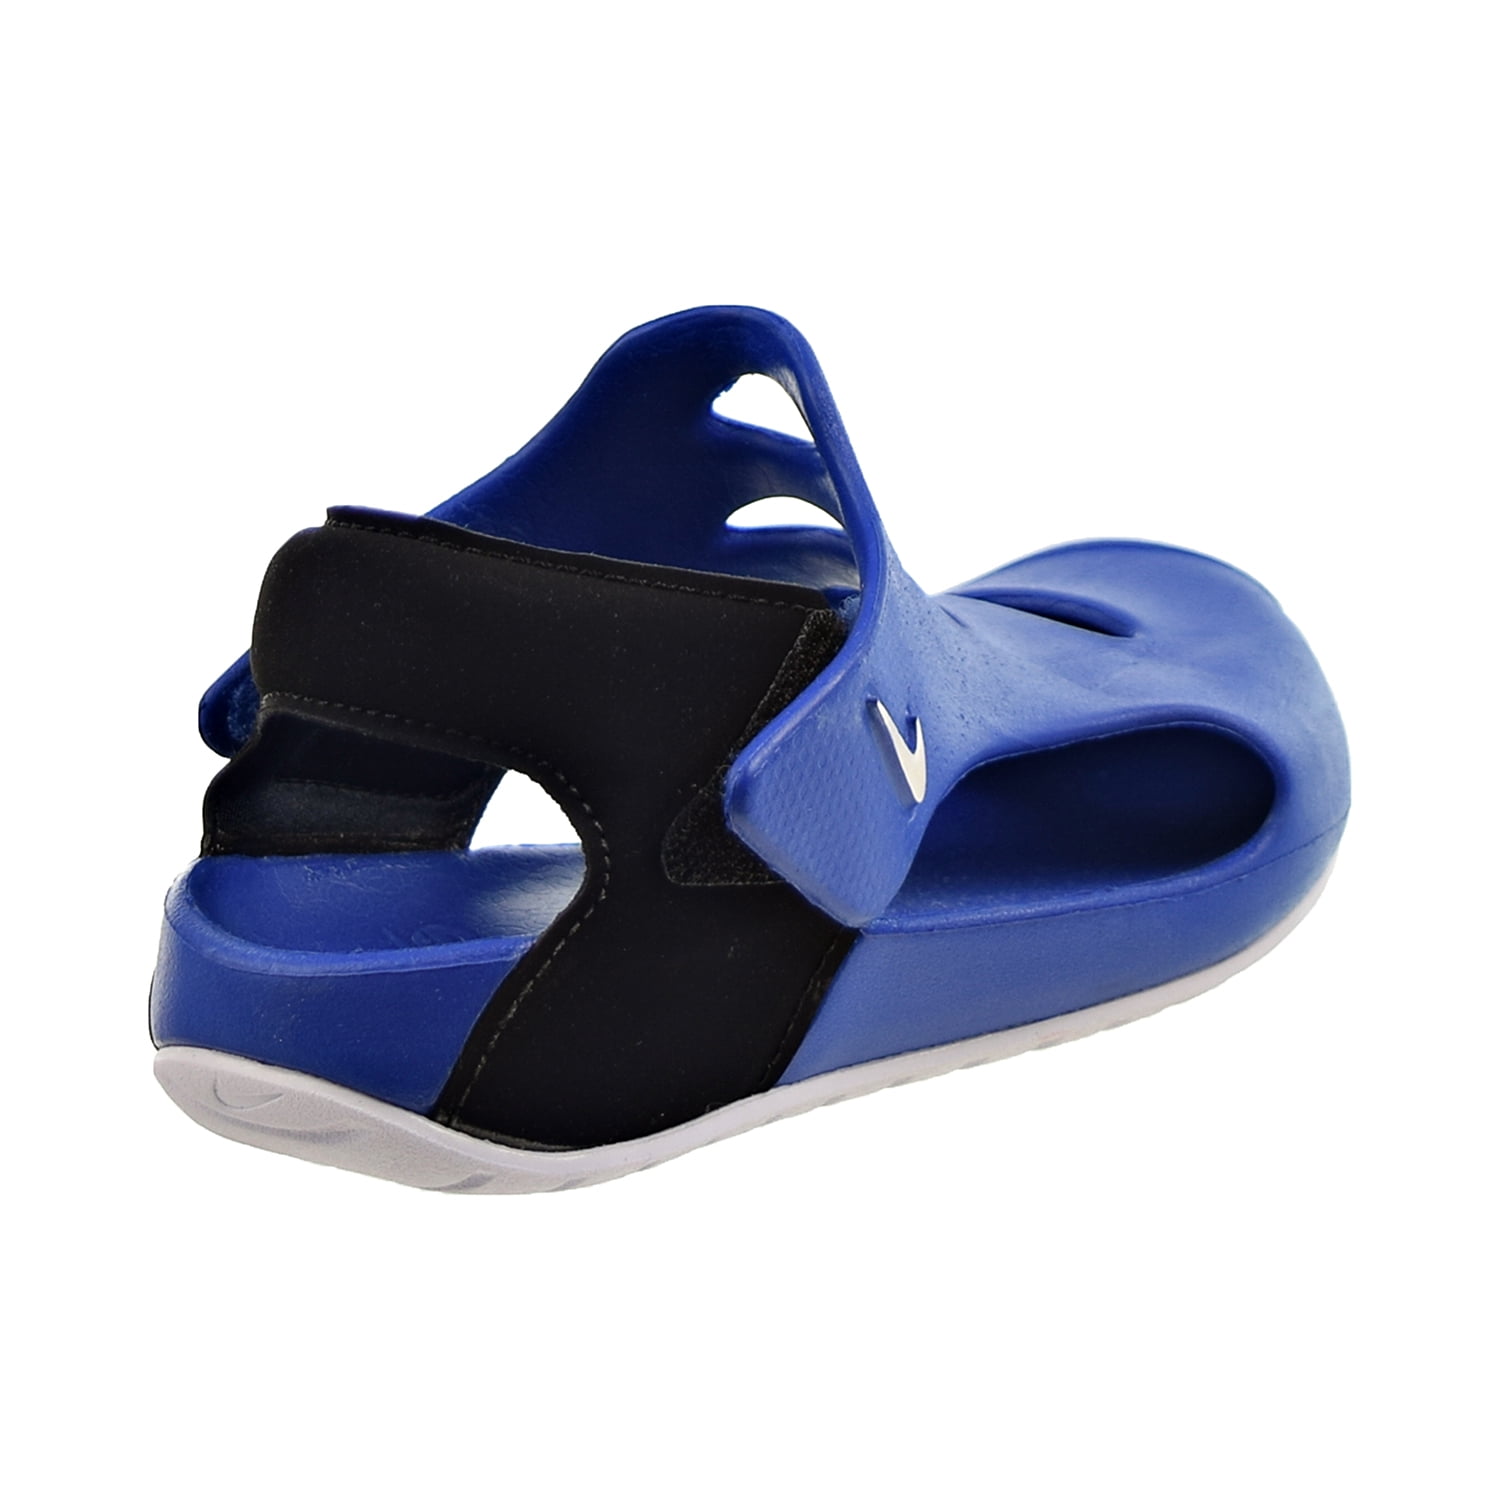 Rondsel Boost voering Nike Sunray Protect 3 (PS) Little Kids' Sandals Game Royal-Black-White  dh9462-400 - Walmart.com